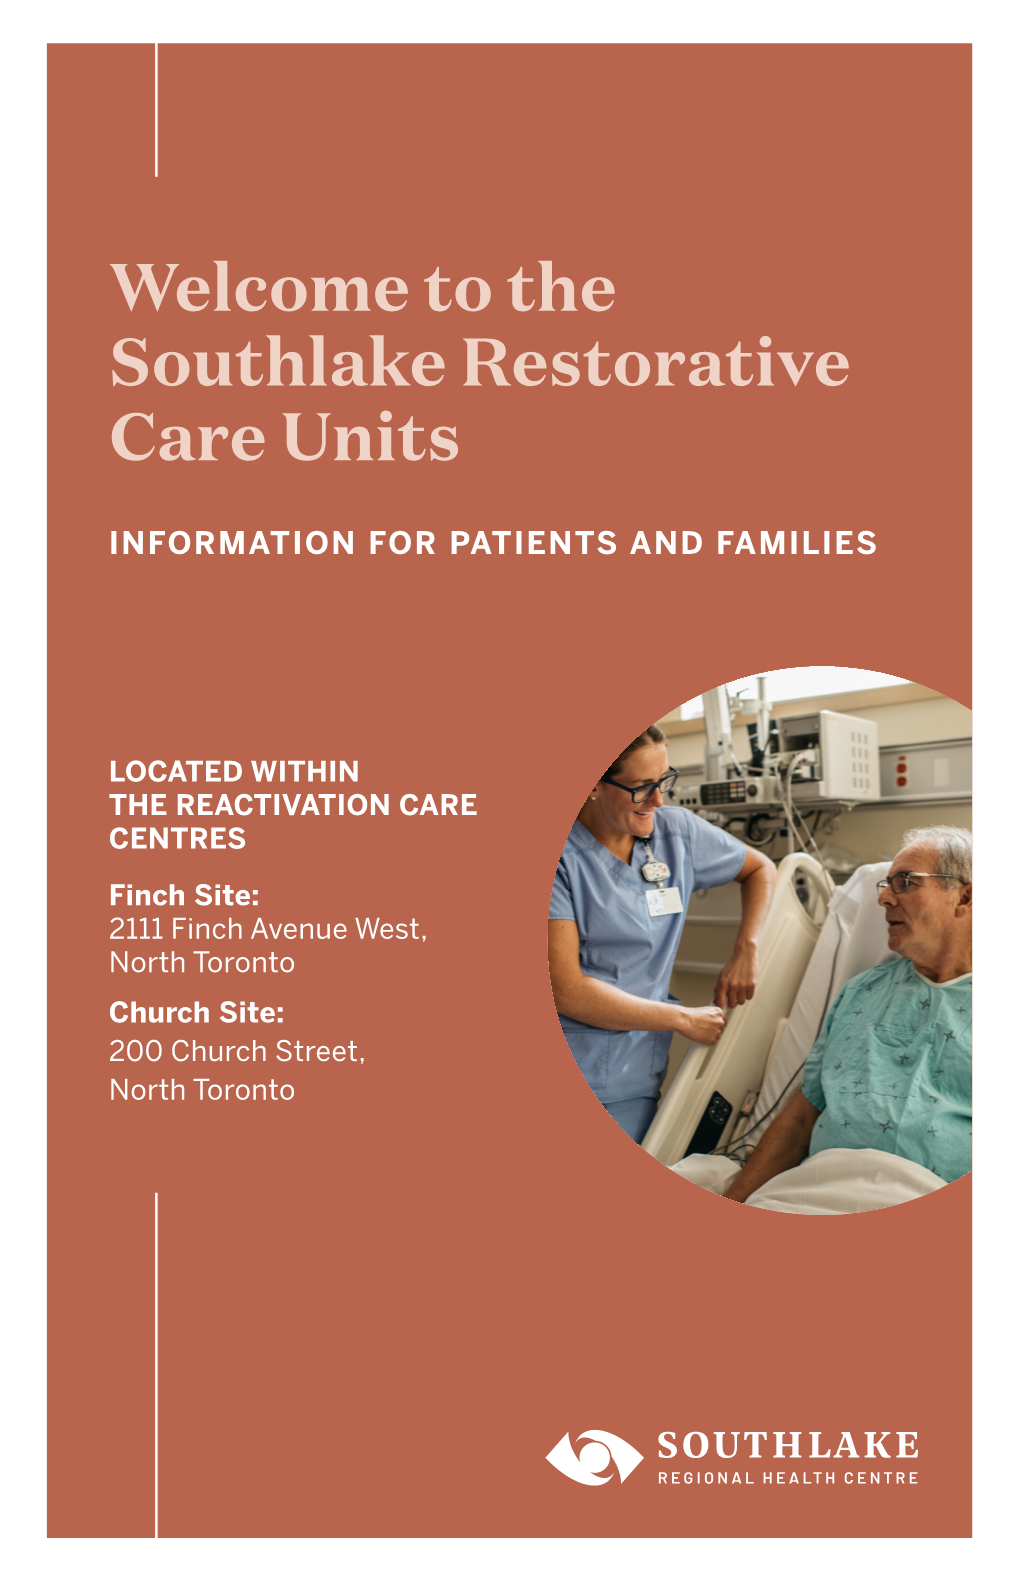 Welcome to the Southlake Restorative Care Units